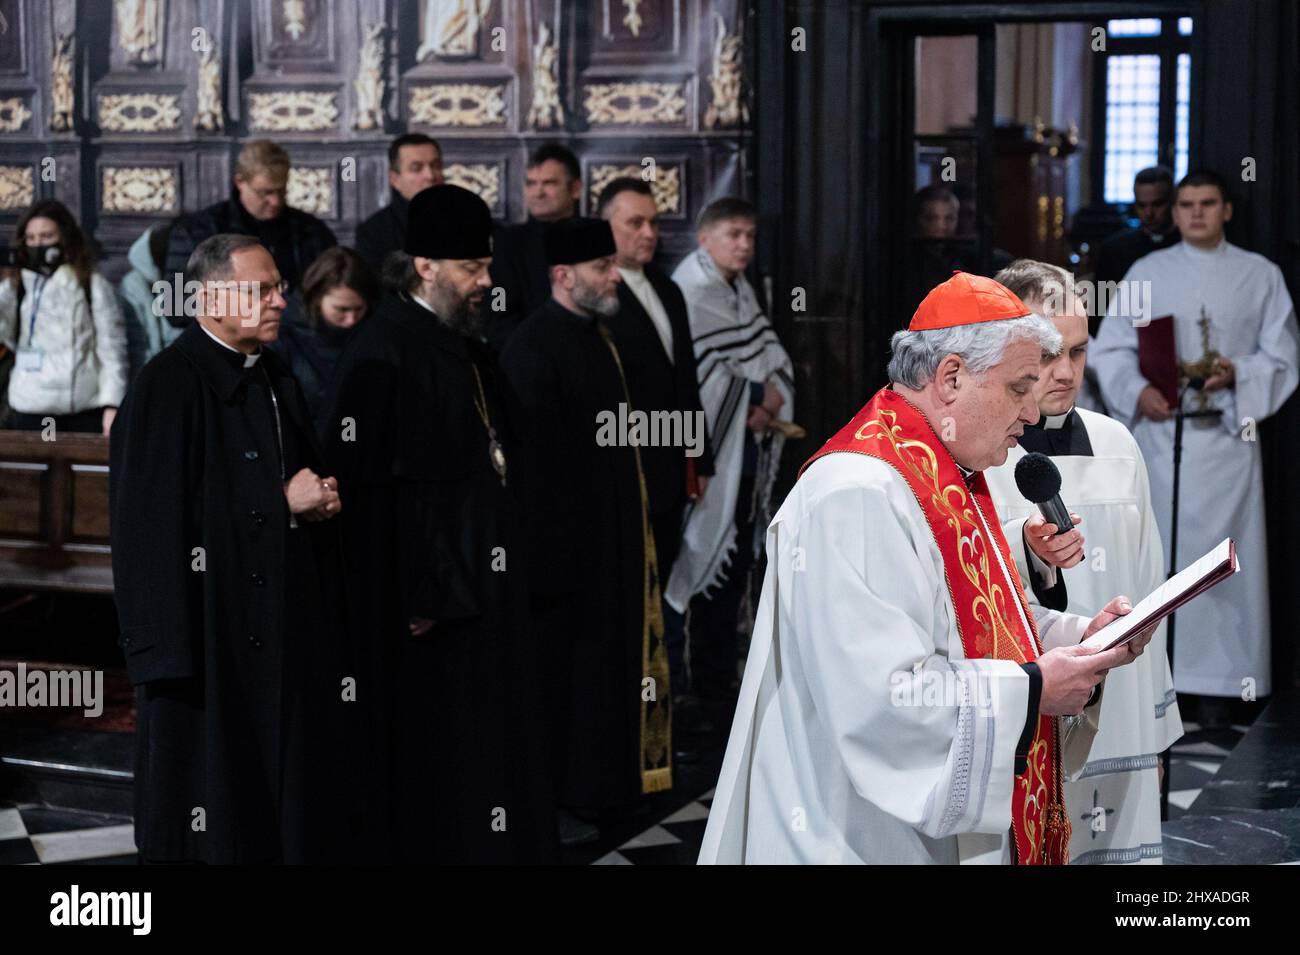 Lviv, Ukraine. 10th Mar, 2022. Cardinal Konrad Krajewsk (R2) leads the service. The Polish Cardinal Konrad Krajewski, the Papal Almoner in Ukraine, attended the interfaith prayer service at the Cathedral of the Assumption of the Blessed Virgin Mary (Lviv Metropolitan Basilica) in Lviv at the presence of representatives of the Pan-Ukrainian Council of Churches and different religious communities. Credit: SOPA Images Limited/Alamy Live News Stock Photo